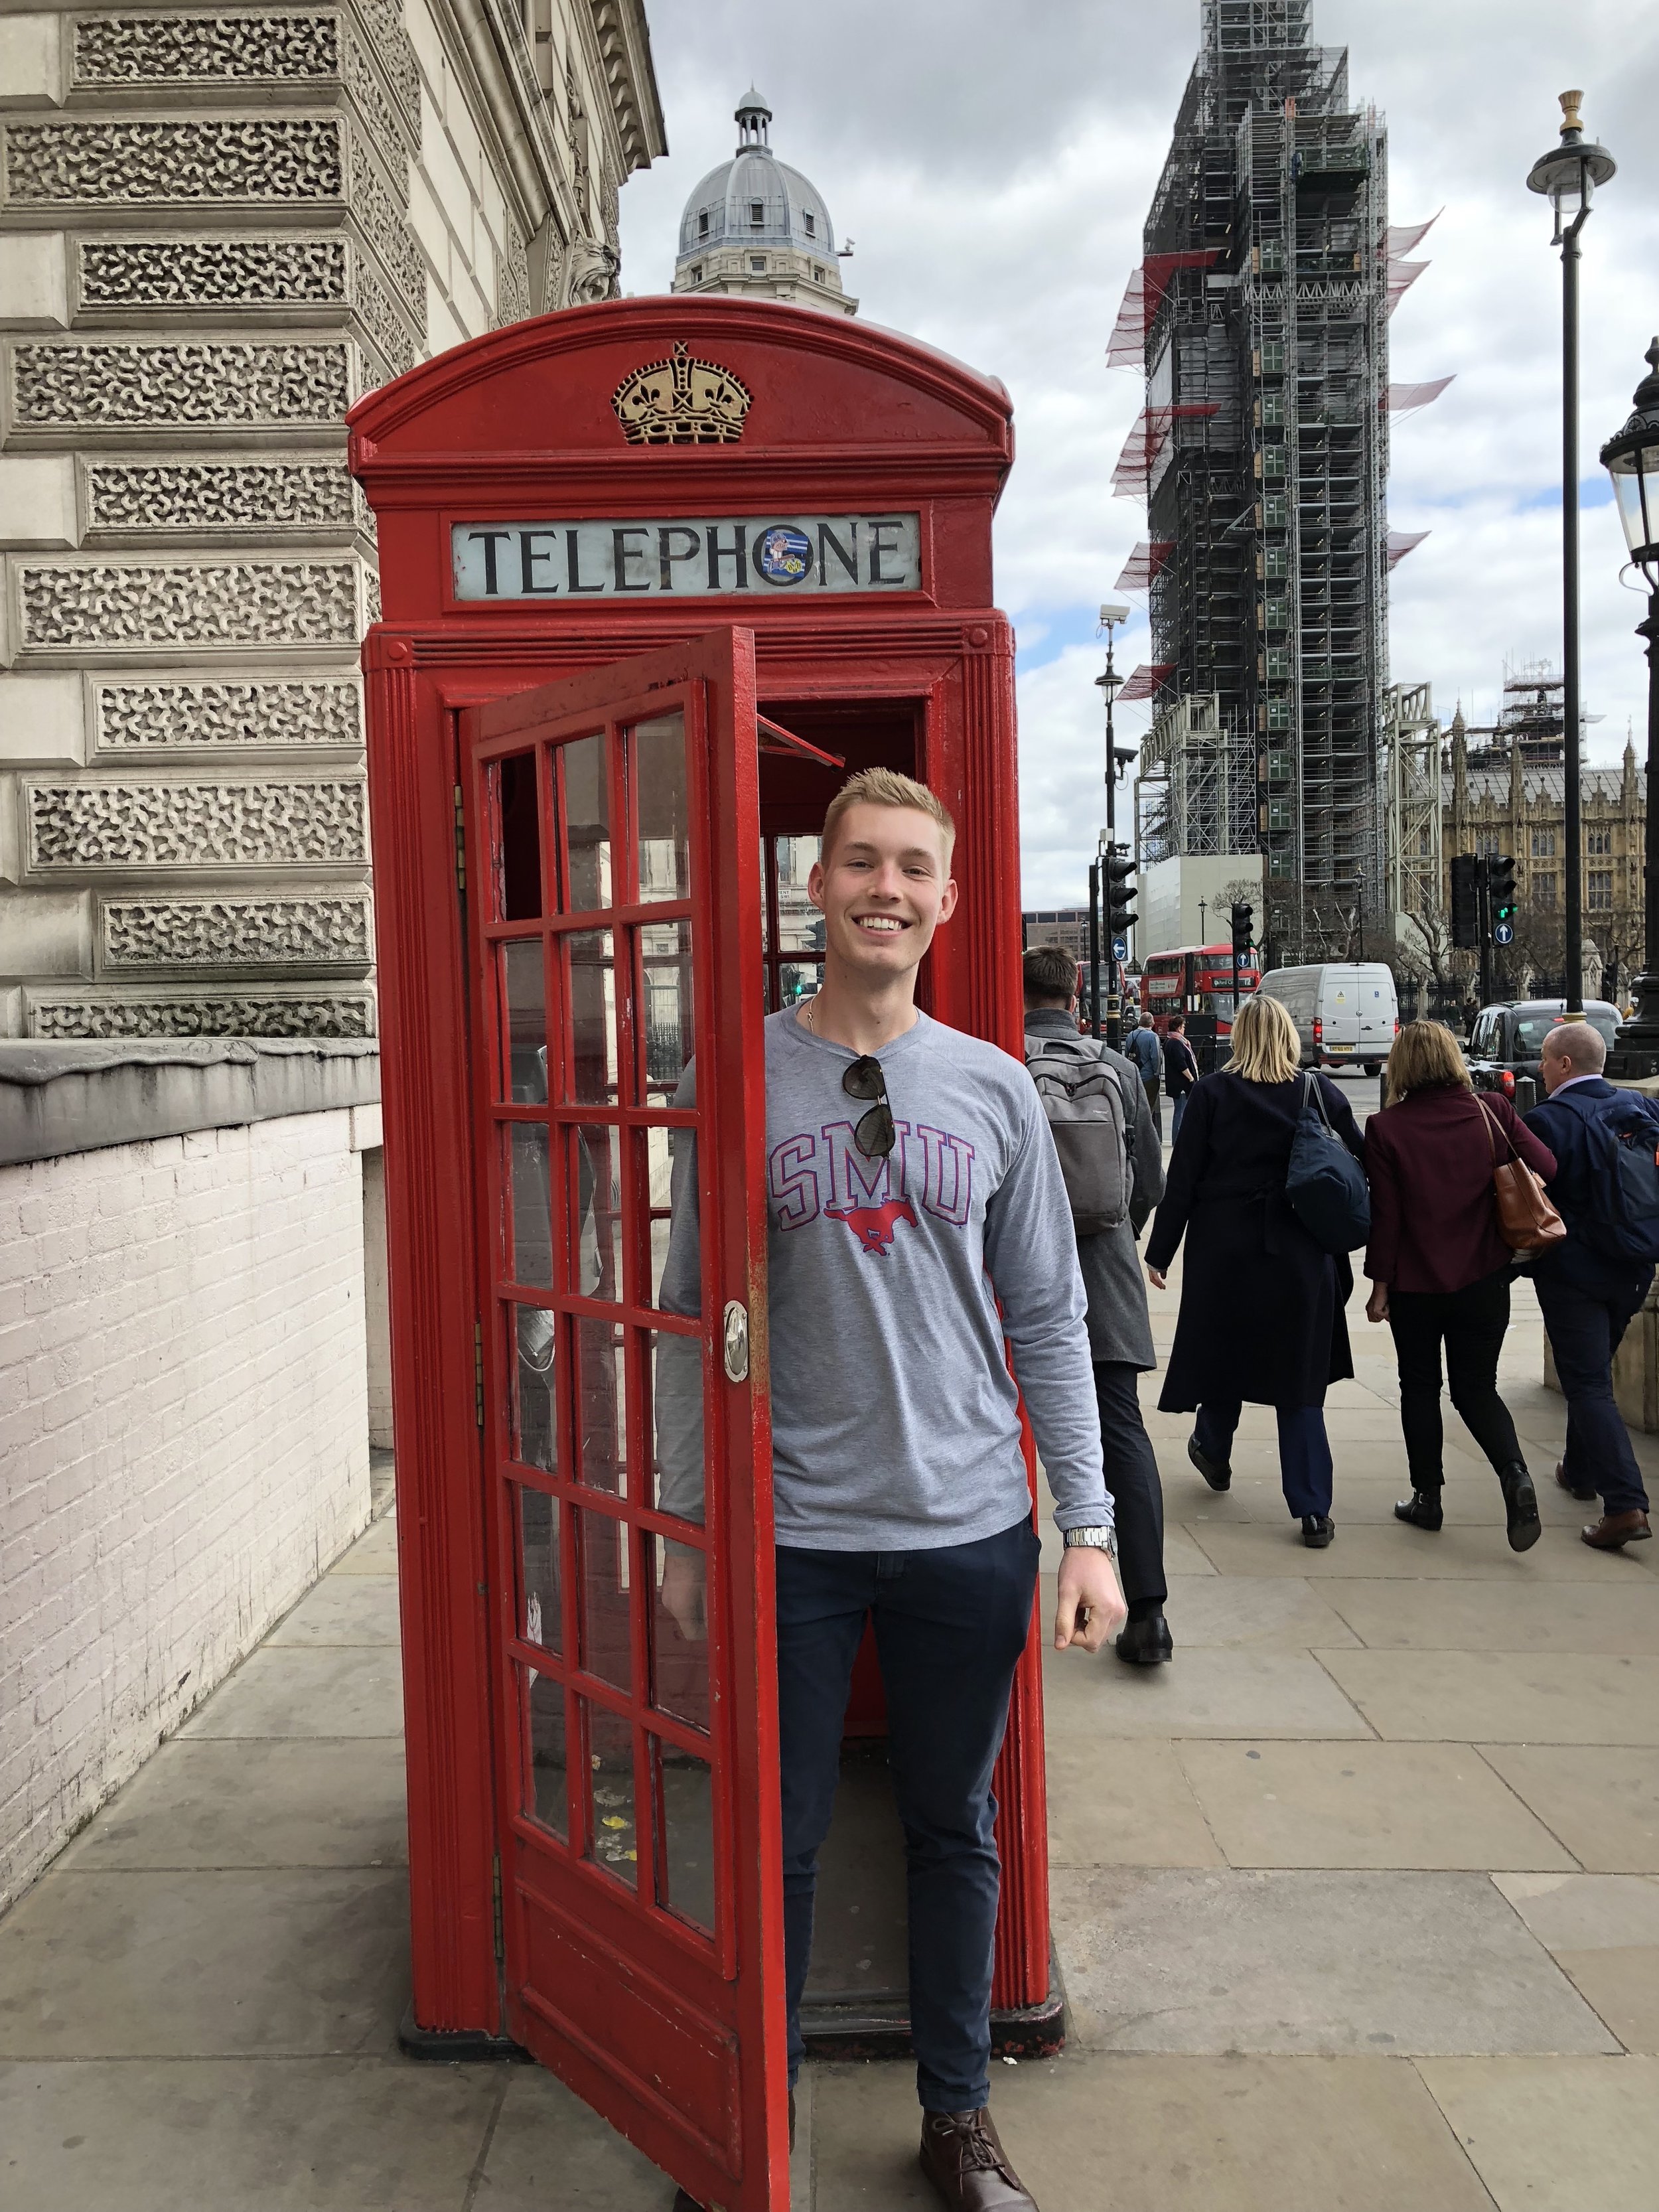 Adam in front of telephone booth in London, Big Ben in the background